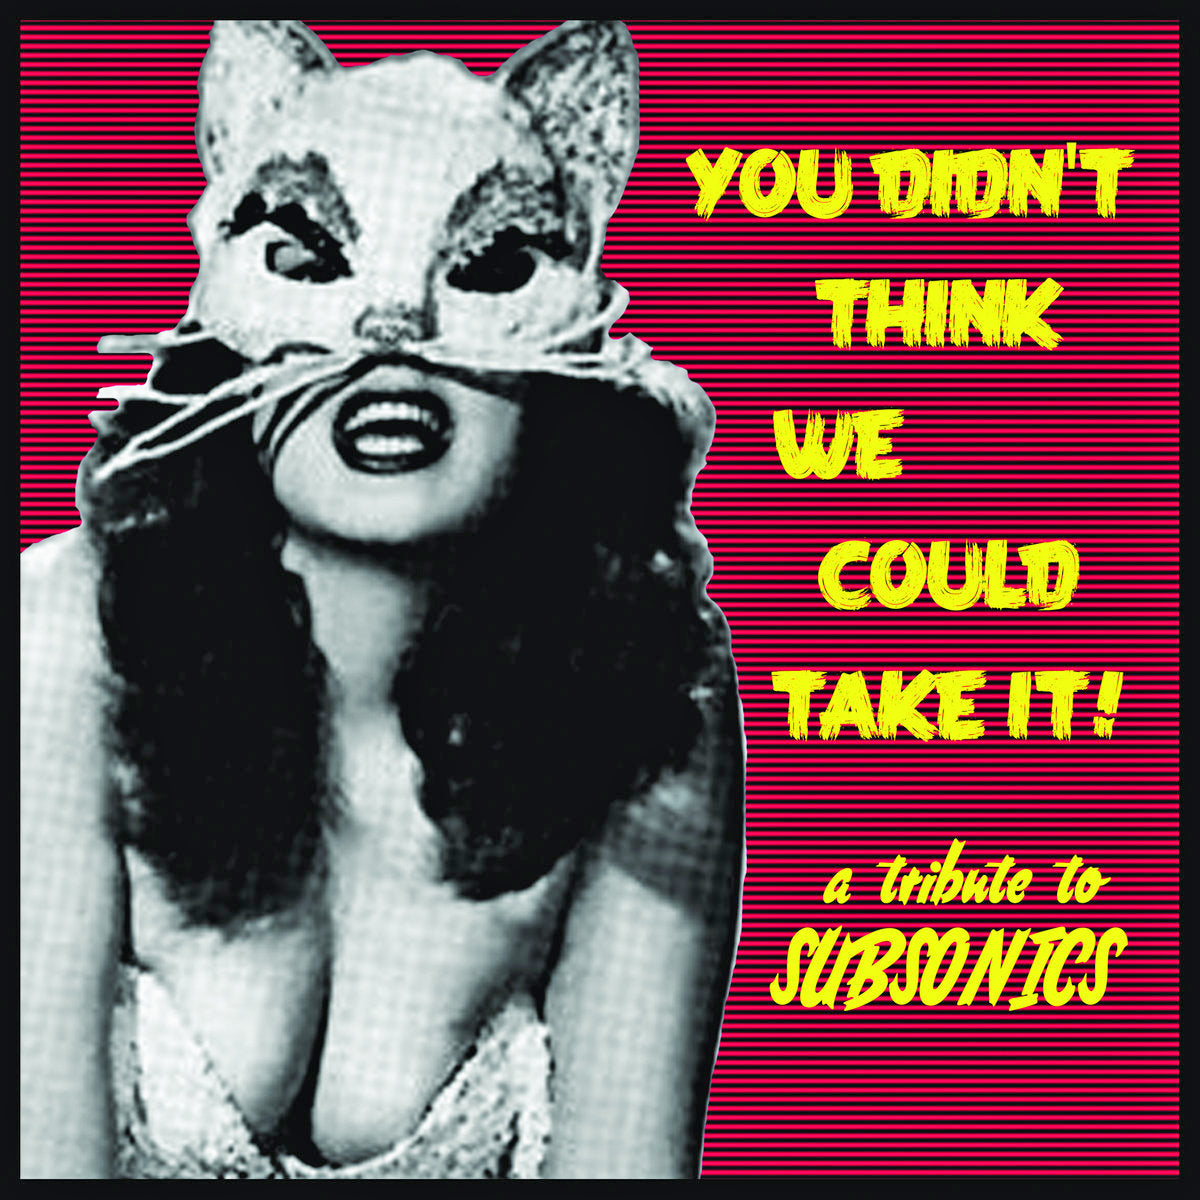 V/A- You Didn't Think We Could Take It - A Tribute to Subsonics 7"